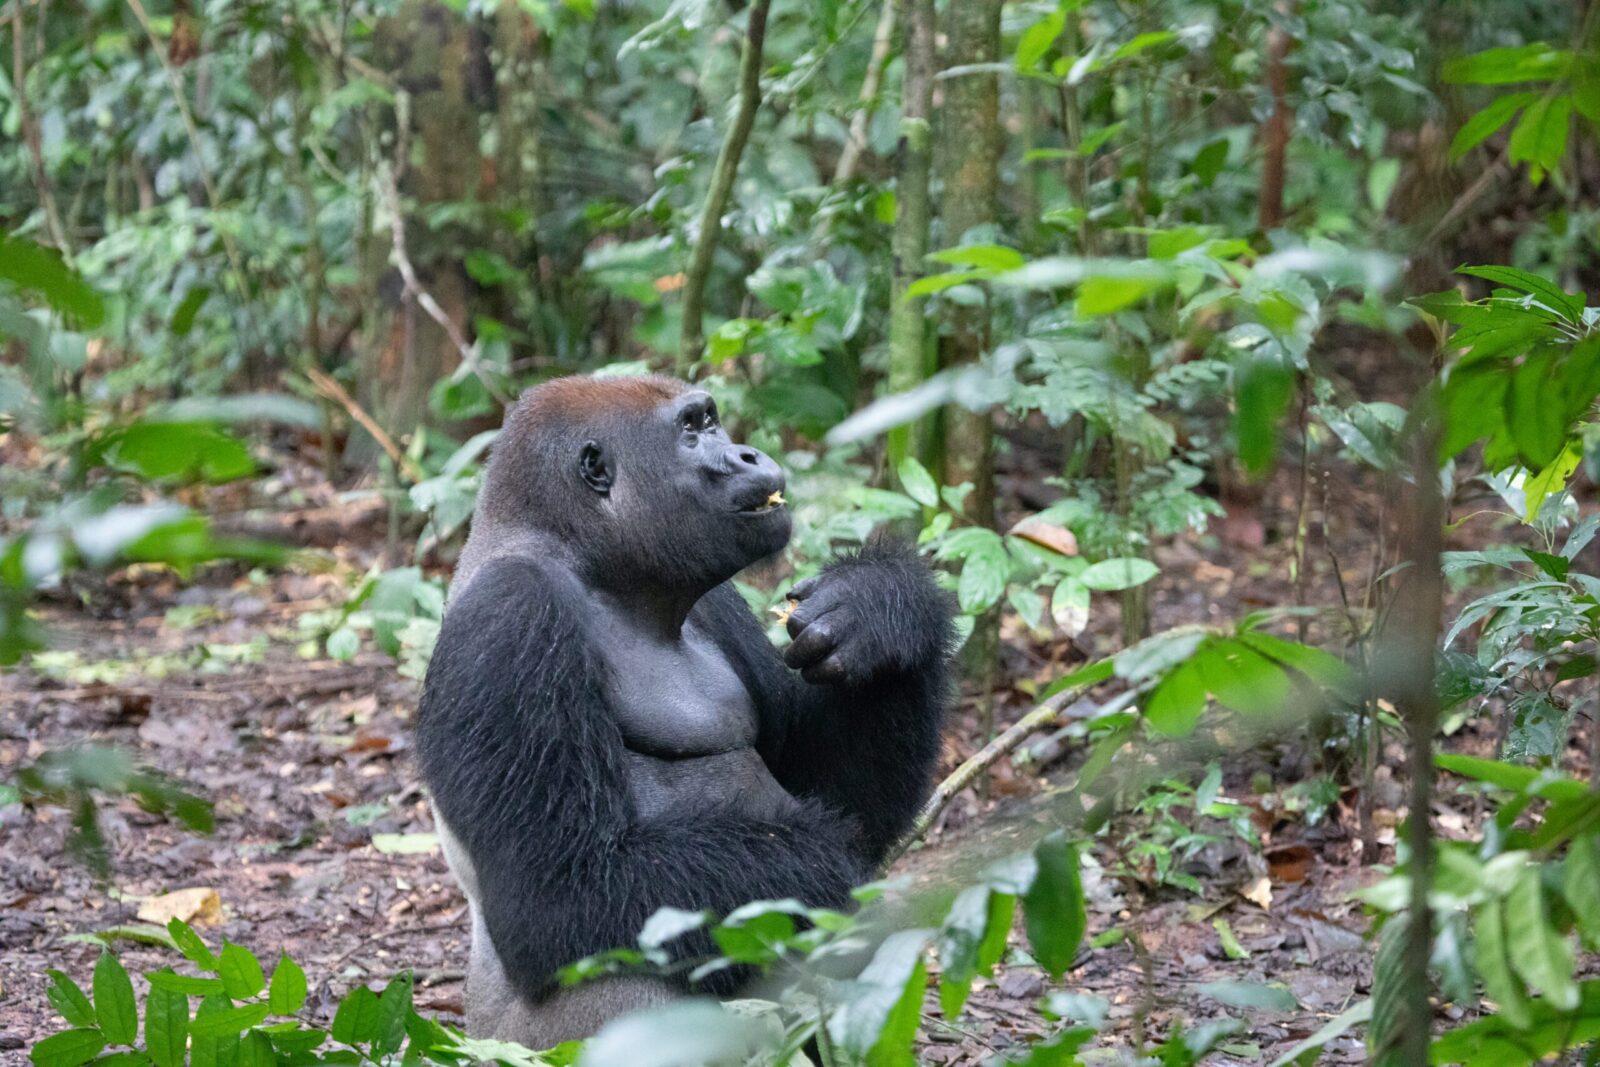 Congolese National Park Annexation Protects Great Apes